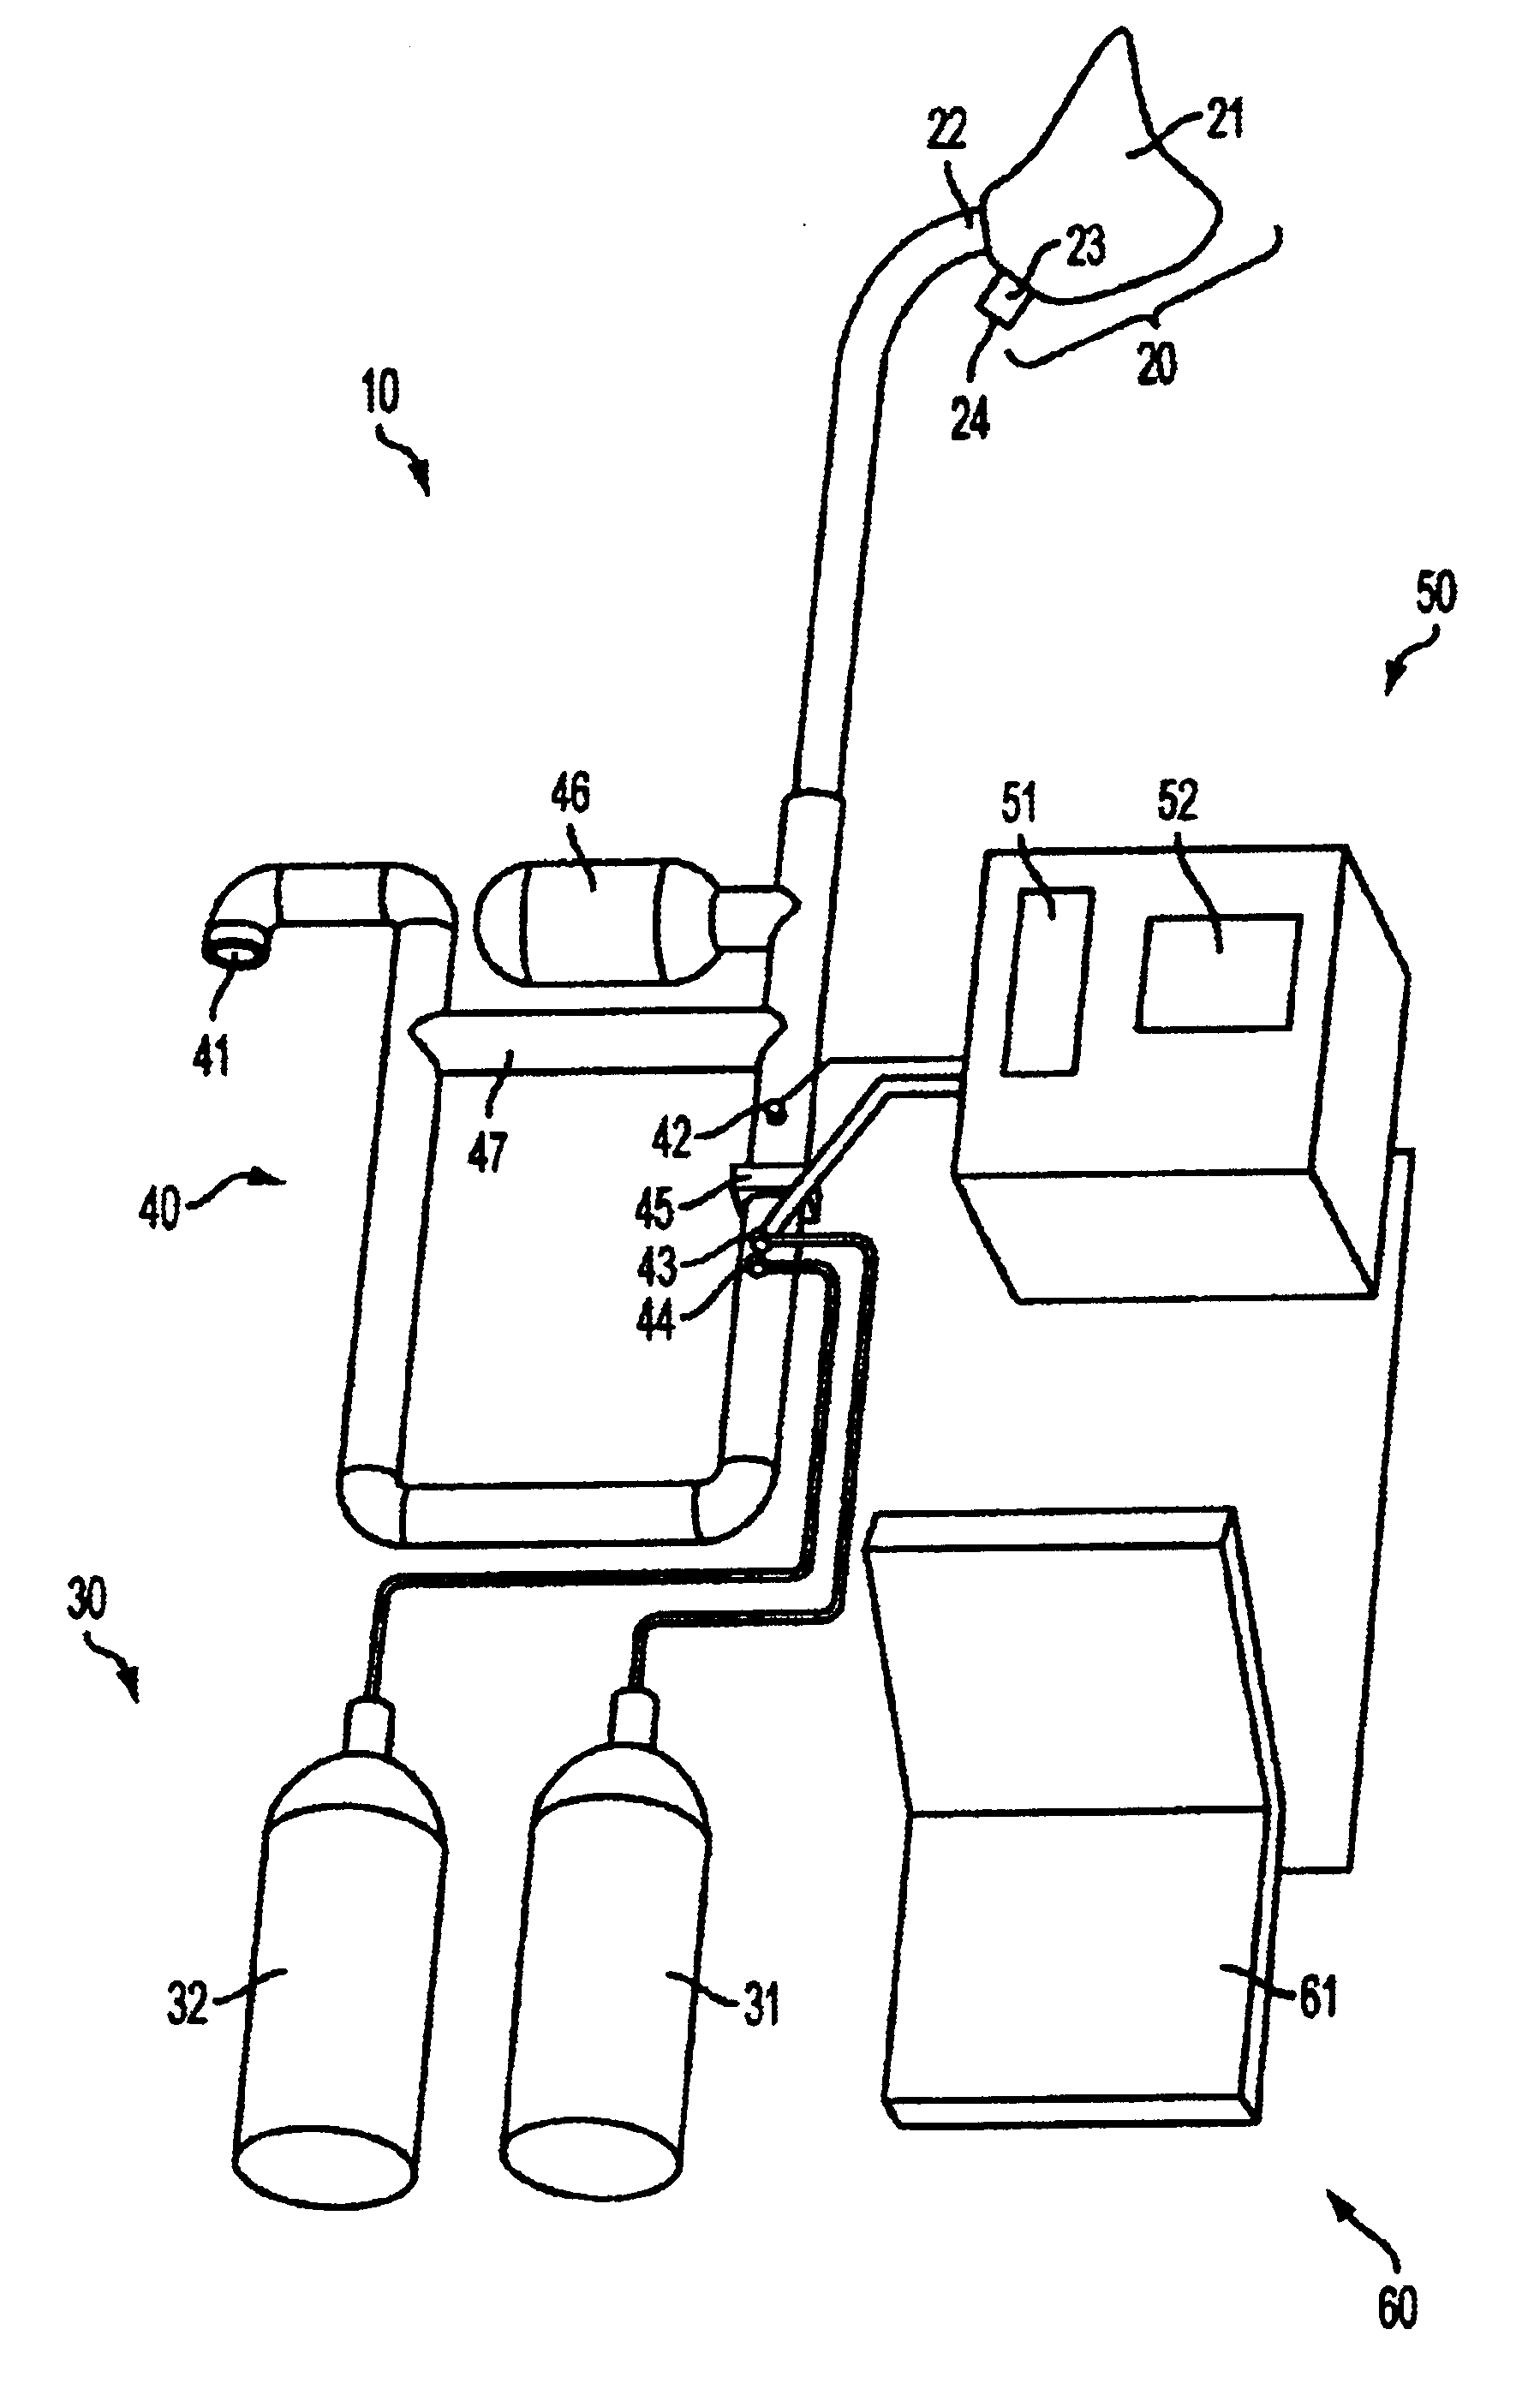 Reduced-oxygen breathing device